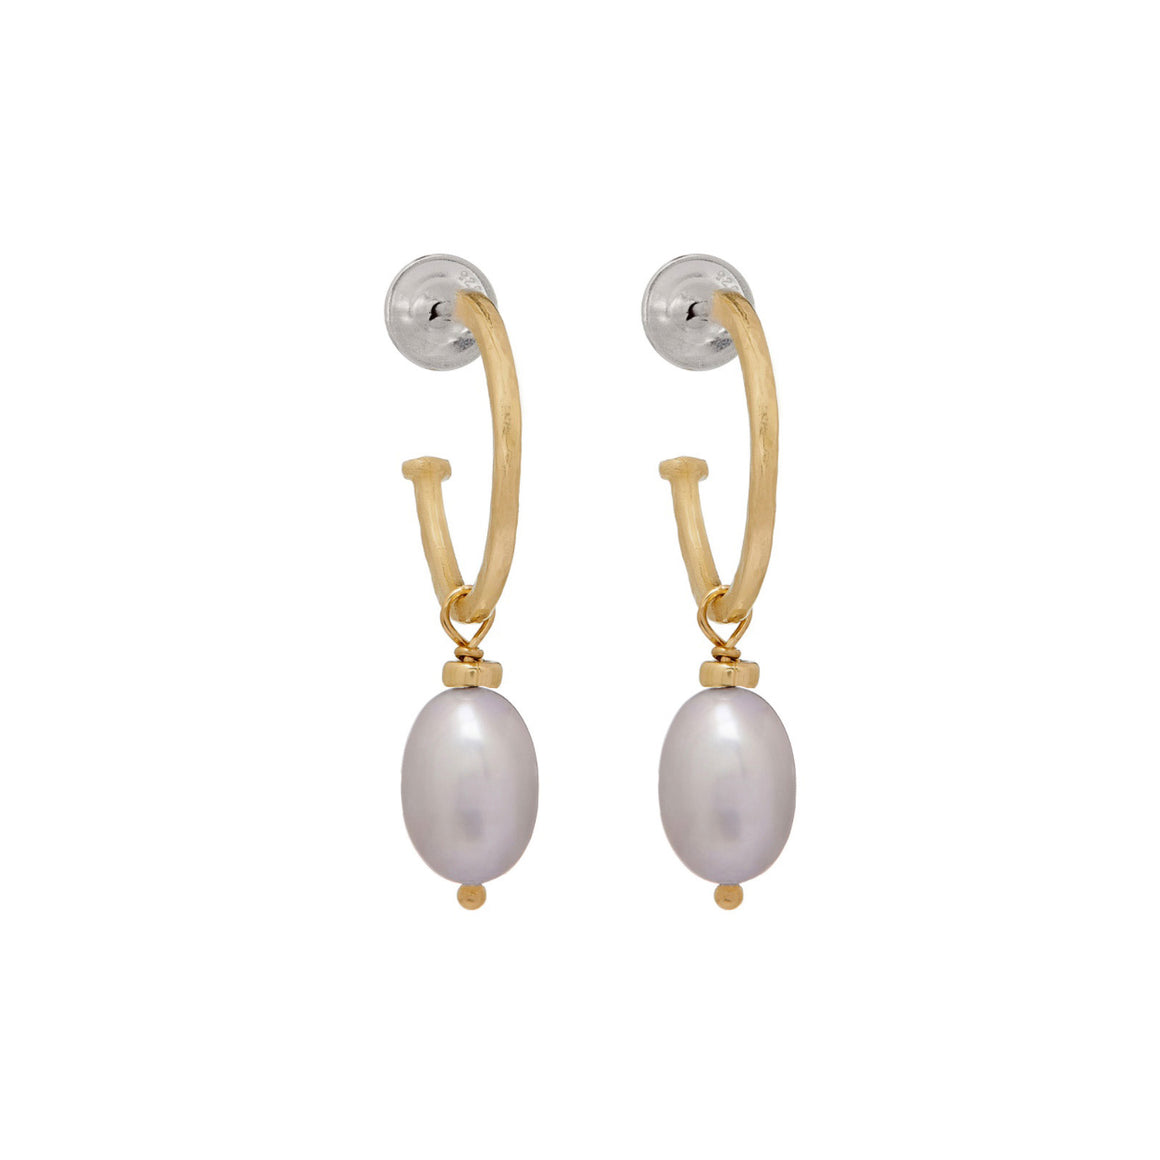 Gold Hoop Earring With Grey Freshwater Pearls